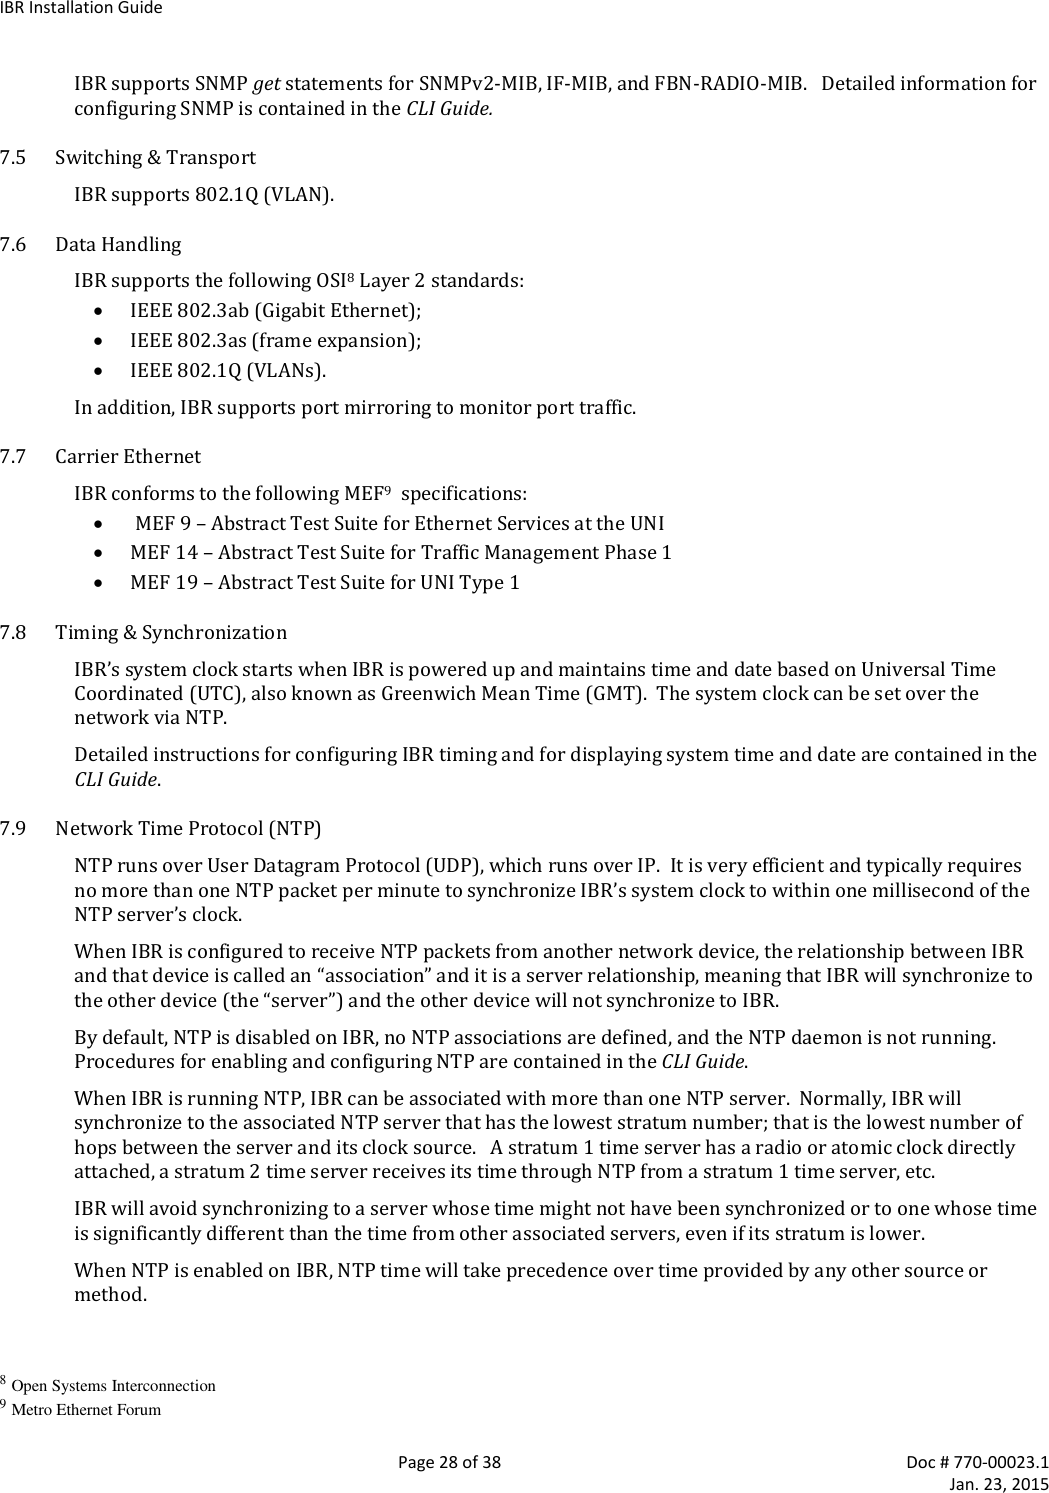 IBR Installation Guide   Page 28 of 38  Doc # 770-00023.1     Jan. 23, 2015 IBR supports SNMP get statements for SNMPv2-MIB, IF-MIB, and FBN-RADIO-MIB.   Detailed information for configuring SNMP is contained in the CLI Guide. 7.5 Switching &amp; Transport IBR supports 802.1Q (VLAN). 7.6 Data Handling IBR supports the following OSI8 Layer 2 standards:  IEEE 802.3ab (Gigabit Ethernet);  IEEE 802.3as (frame expansion);  IEEE 802.1Q (VLANs). In addition, IBR supports port mirroring to monitor port traffic. 7.7 Carrier Ethernet IBR conforms to the following MEF9  specifications:   MEF 9 – Abstract Test Suite for Ethernet Services at the UNI  MEF 14 – Abstract Test Suite for Traffic Management Phase 1  MEF 19 – Abstract Test Suite for UNI Type 1 7.8 Timing &amp; Synchronization IBR’s system clock starts when IBR is powered up and maintains time and date based on Universal Time Coordinated (UTC), also known as Greenwich Mean Time (GMT).  The system clock can be set over the network via NTP. Detailed instructions for configuring IBR timing and for displaying system time and date are contained in the CLI Guide. 7.9 Network Time Protocol (NTP) NTP runs over User Datagram Protocol (UDP), which runs over IP.  It is very efficient and typically requires no more than one NTP packet per minute to synchronize IBR’s system clock to within one millisecond of the NTP server’s clock. When IBR is configured to receive NTP packets from another network device, the relationship between IBR and that device is called an “association” and it is a server relationship, meaning that IBR will synchronize to the other device (the “server”) and the other device will not synchronize to IBR.  By default, NTP is disabled on IBR, no NTP associations are defined, and the NTP daemon is not running.  Procedures for enabling and configuring NTP are contained in the CLI Guide. When IBR is running NTP, IBR can be associated with more than one NTP server.  Normally, IBR will synchronize to the associated NTP server that has the lowest stratum number; that is the lowest number of hops between the server and its clock source.   A stratum 1 time server has a radio or atomic clock directly attached, a stratum 2 time server receives its time through NTP from a stratum 1 time server, etc. IBR will avoid synchronizing to a server whose time might not have been synchronized or to one whose time is significantly different than the time from other associated servers, even if its stratum is lower. When NTP is enabled on IBR, NTP time will take precedence over time provided by any other source or method.  8 Open Systems Interconnection 9 Metro Ethernet Forum 